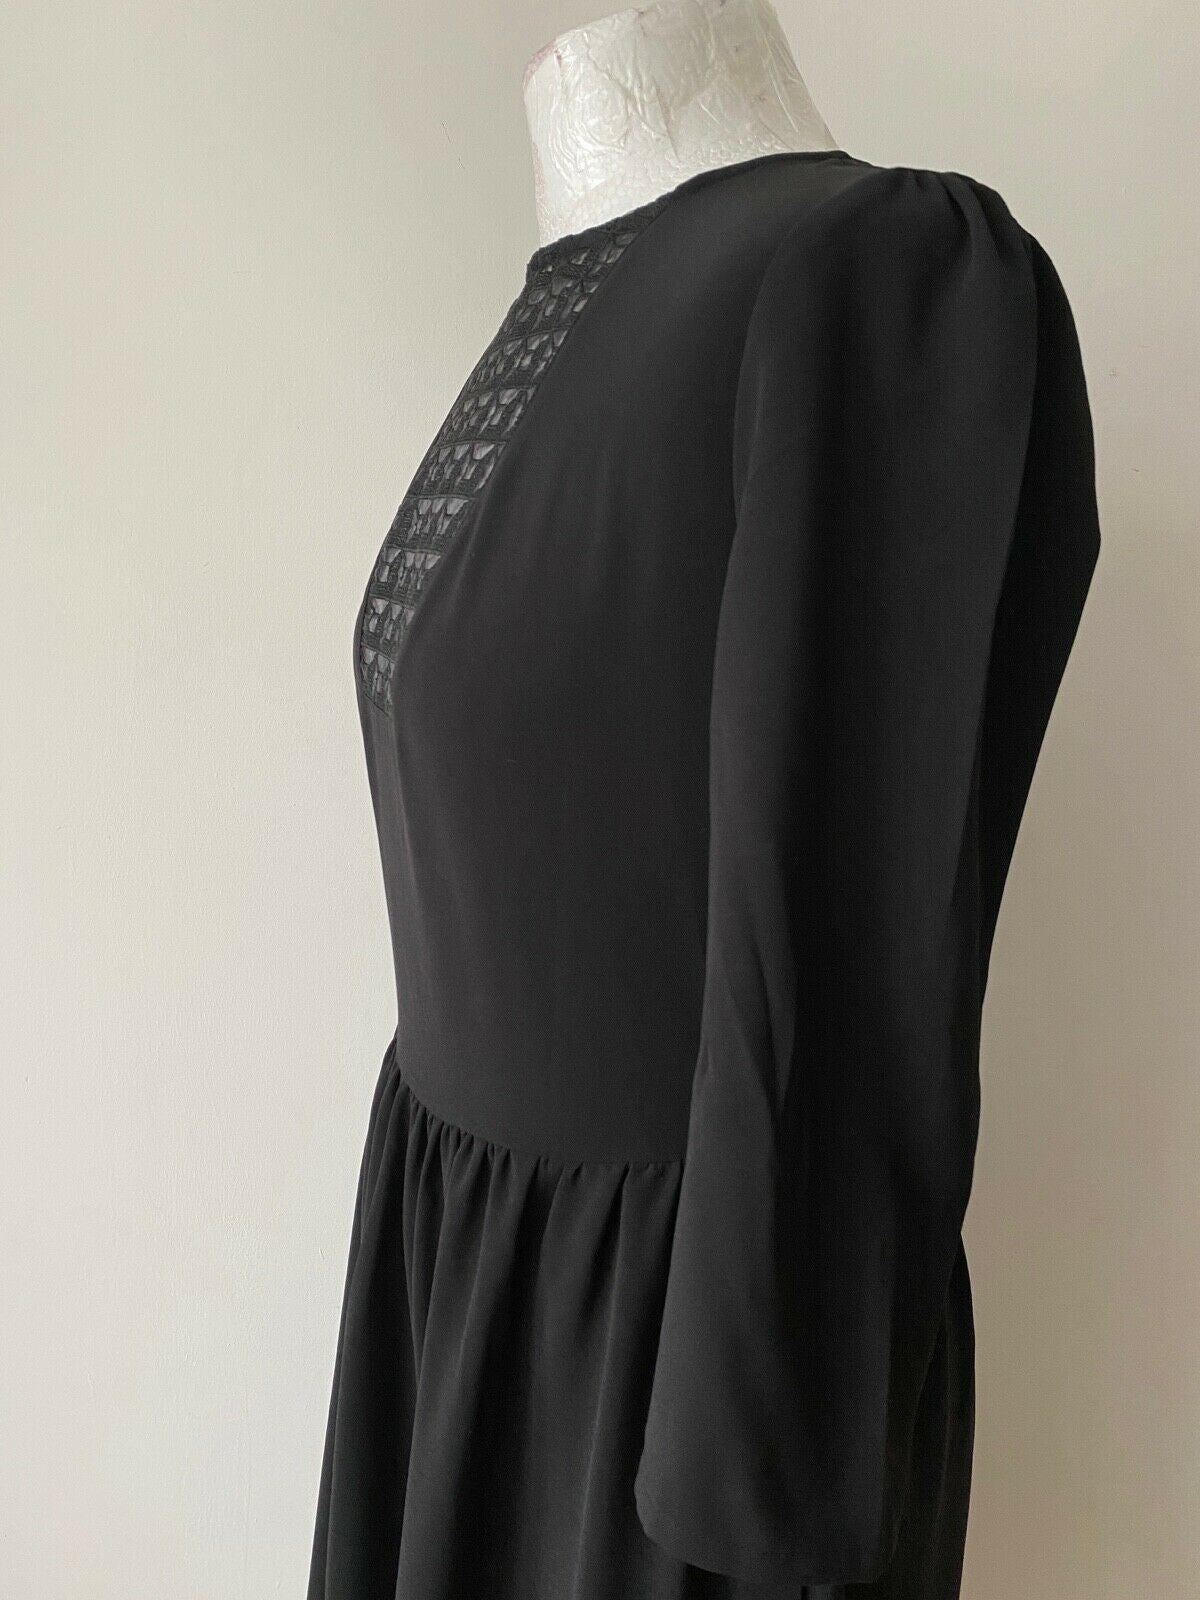 Mademoiselle R Black Midi Fit & Flare Dress Size 10 Embroidered Neck Panel